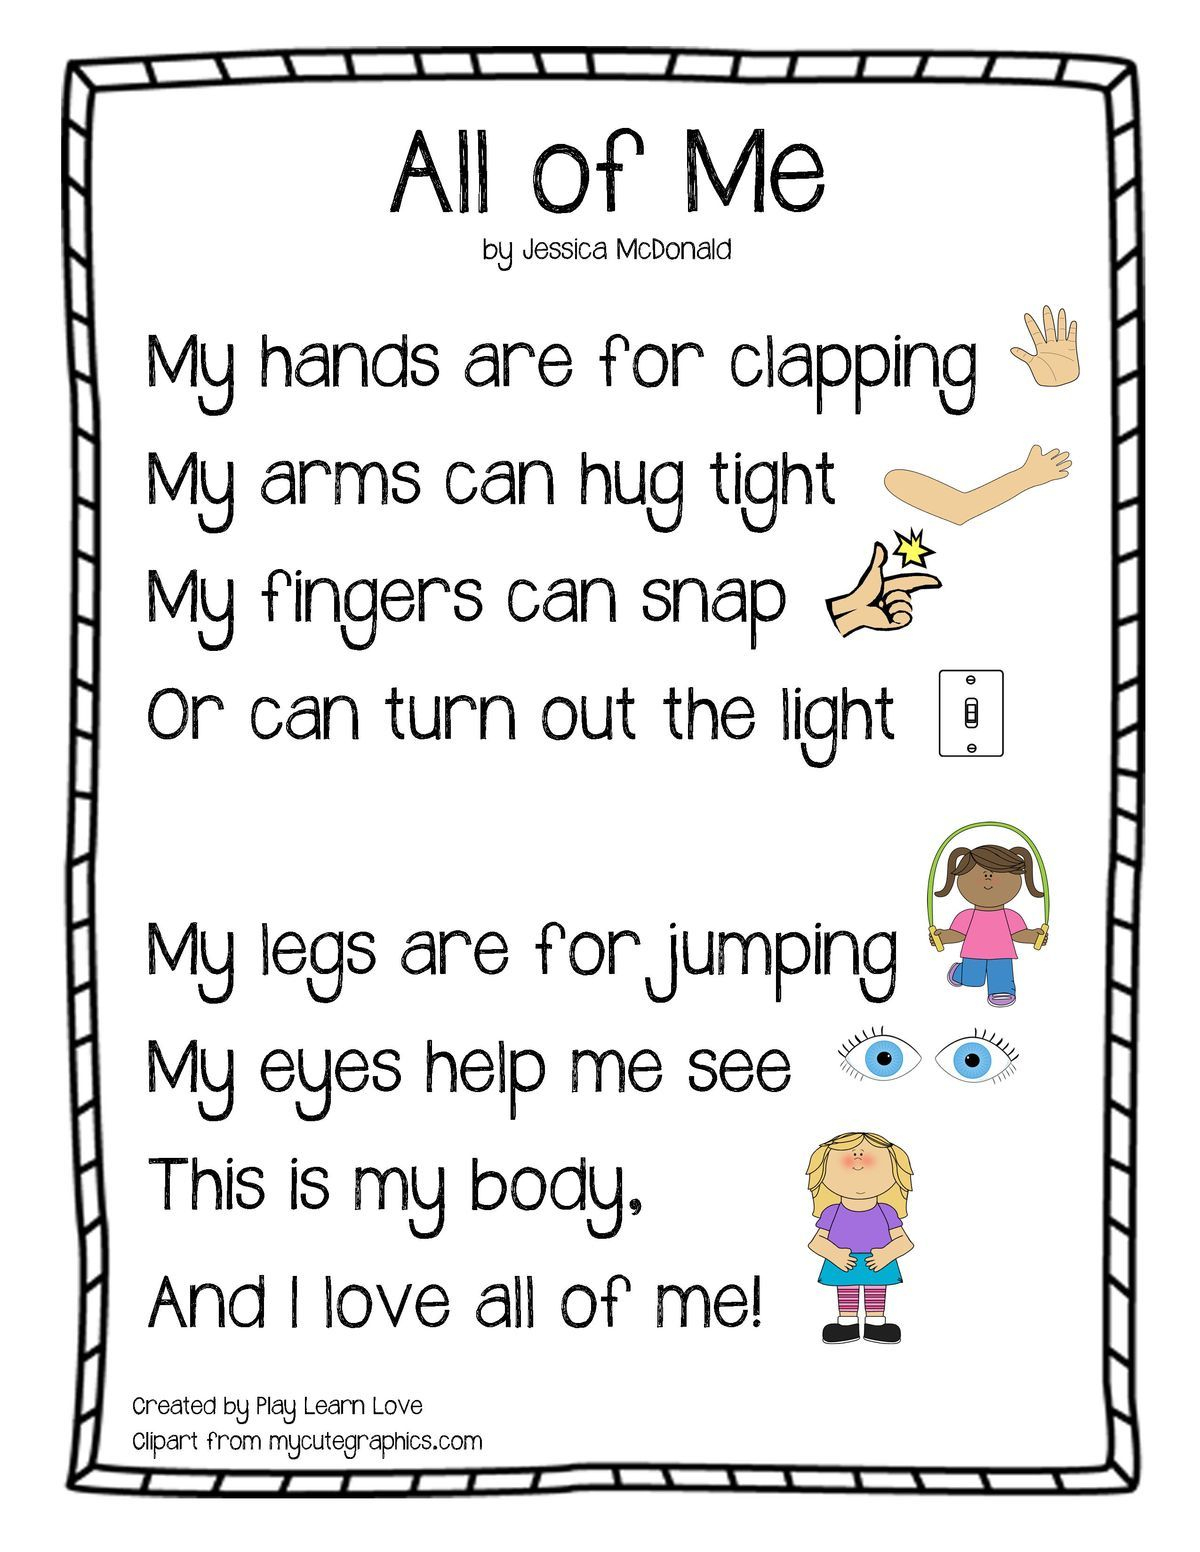 All About Me - My Body Lesson Plan | Lesson Plans For